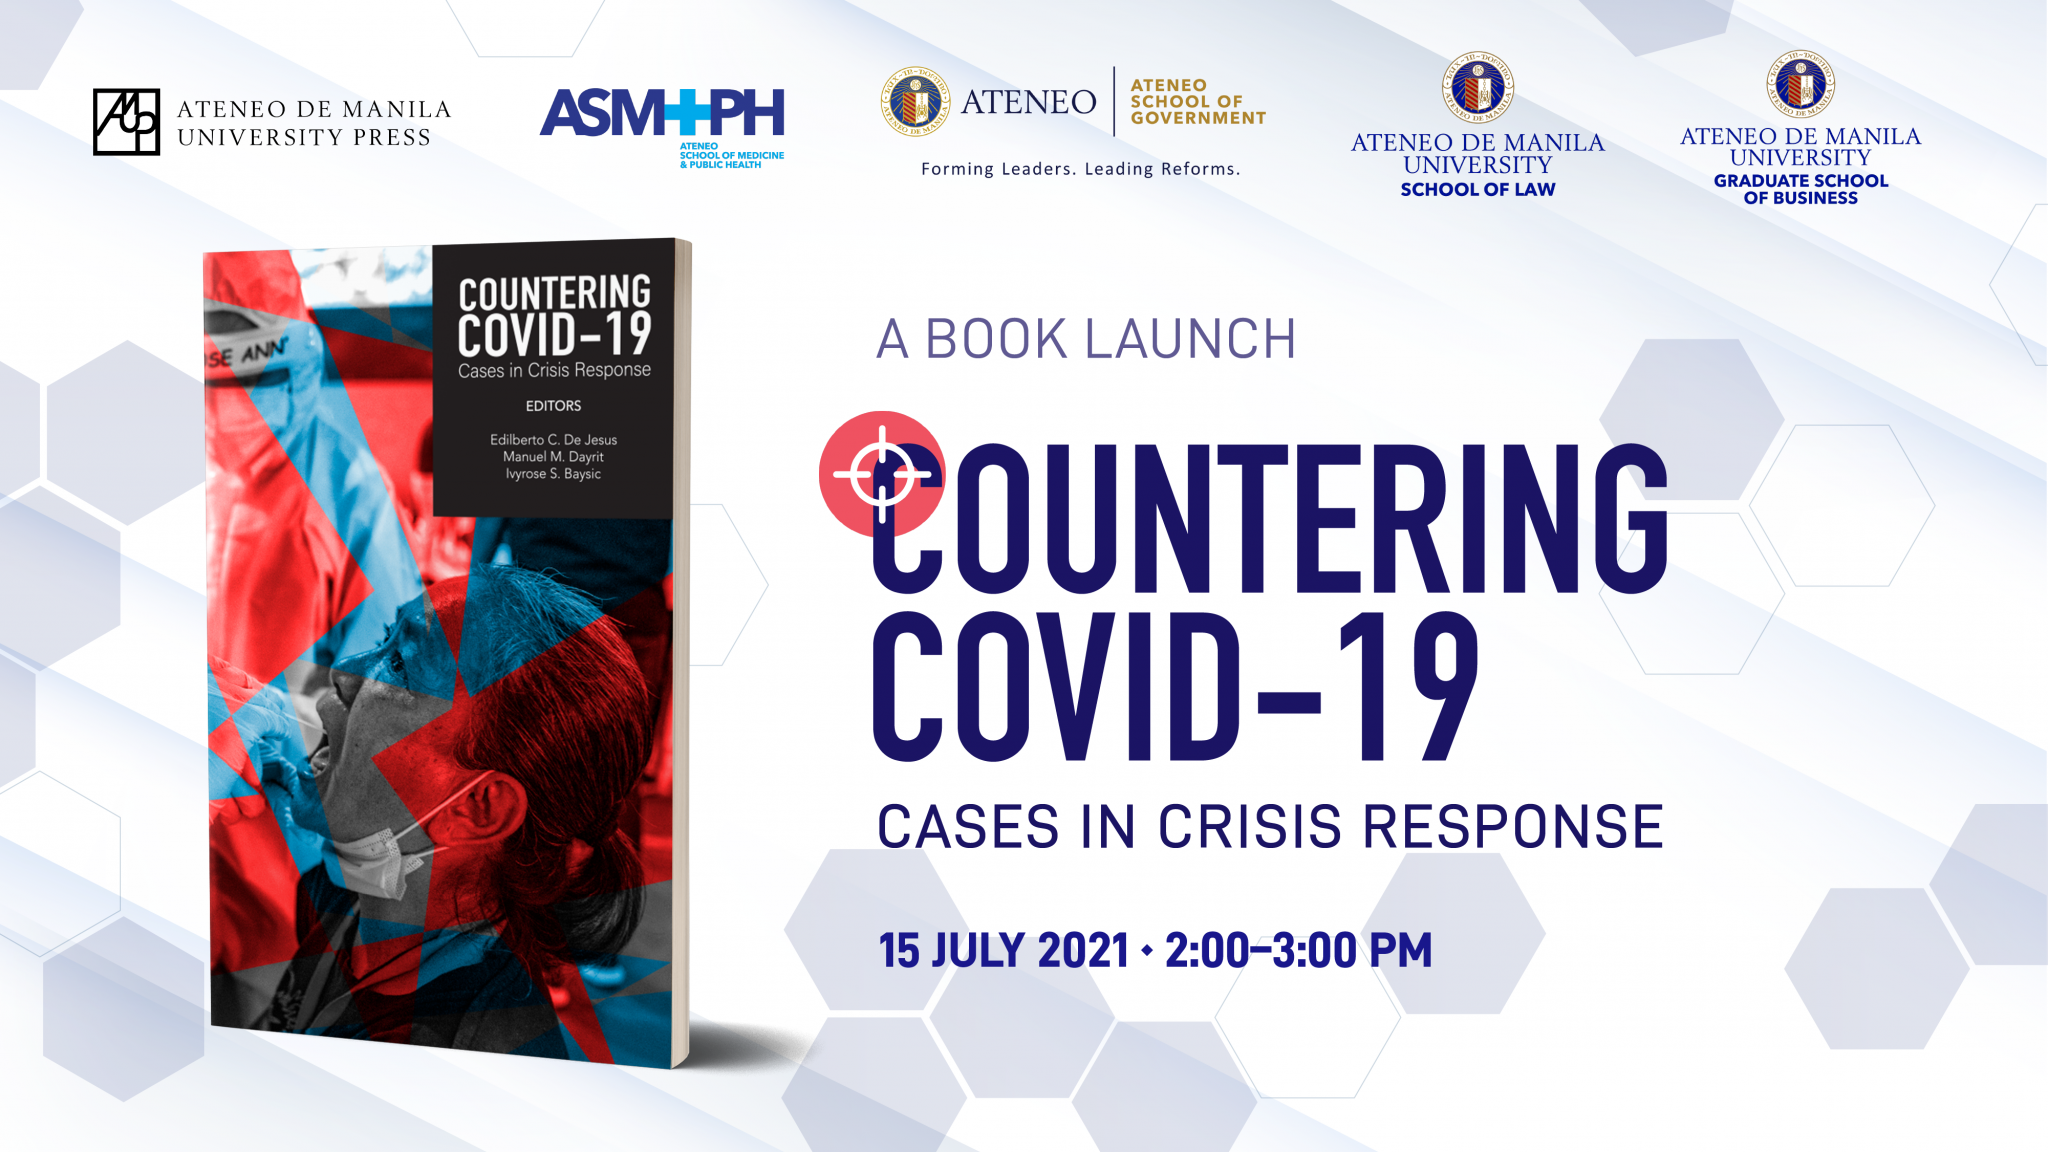  Featured image for article title Launch of “Countering COVID-19: Cases in Crisis Response"